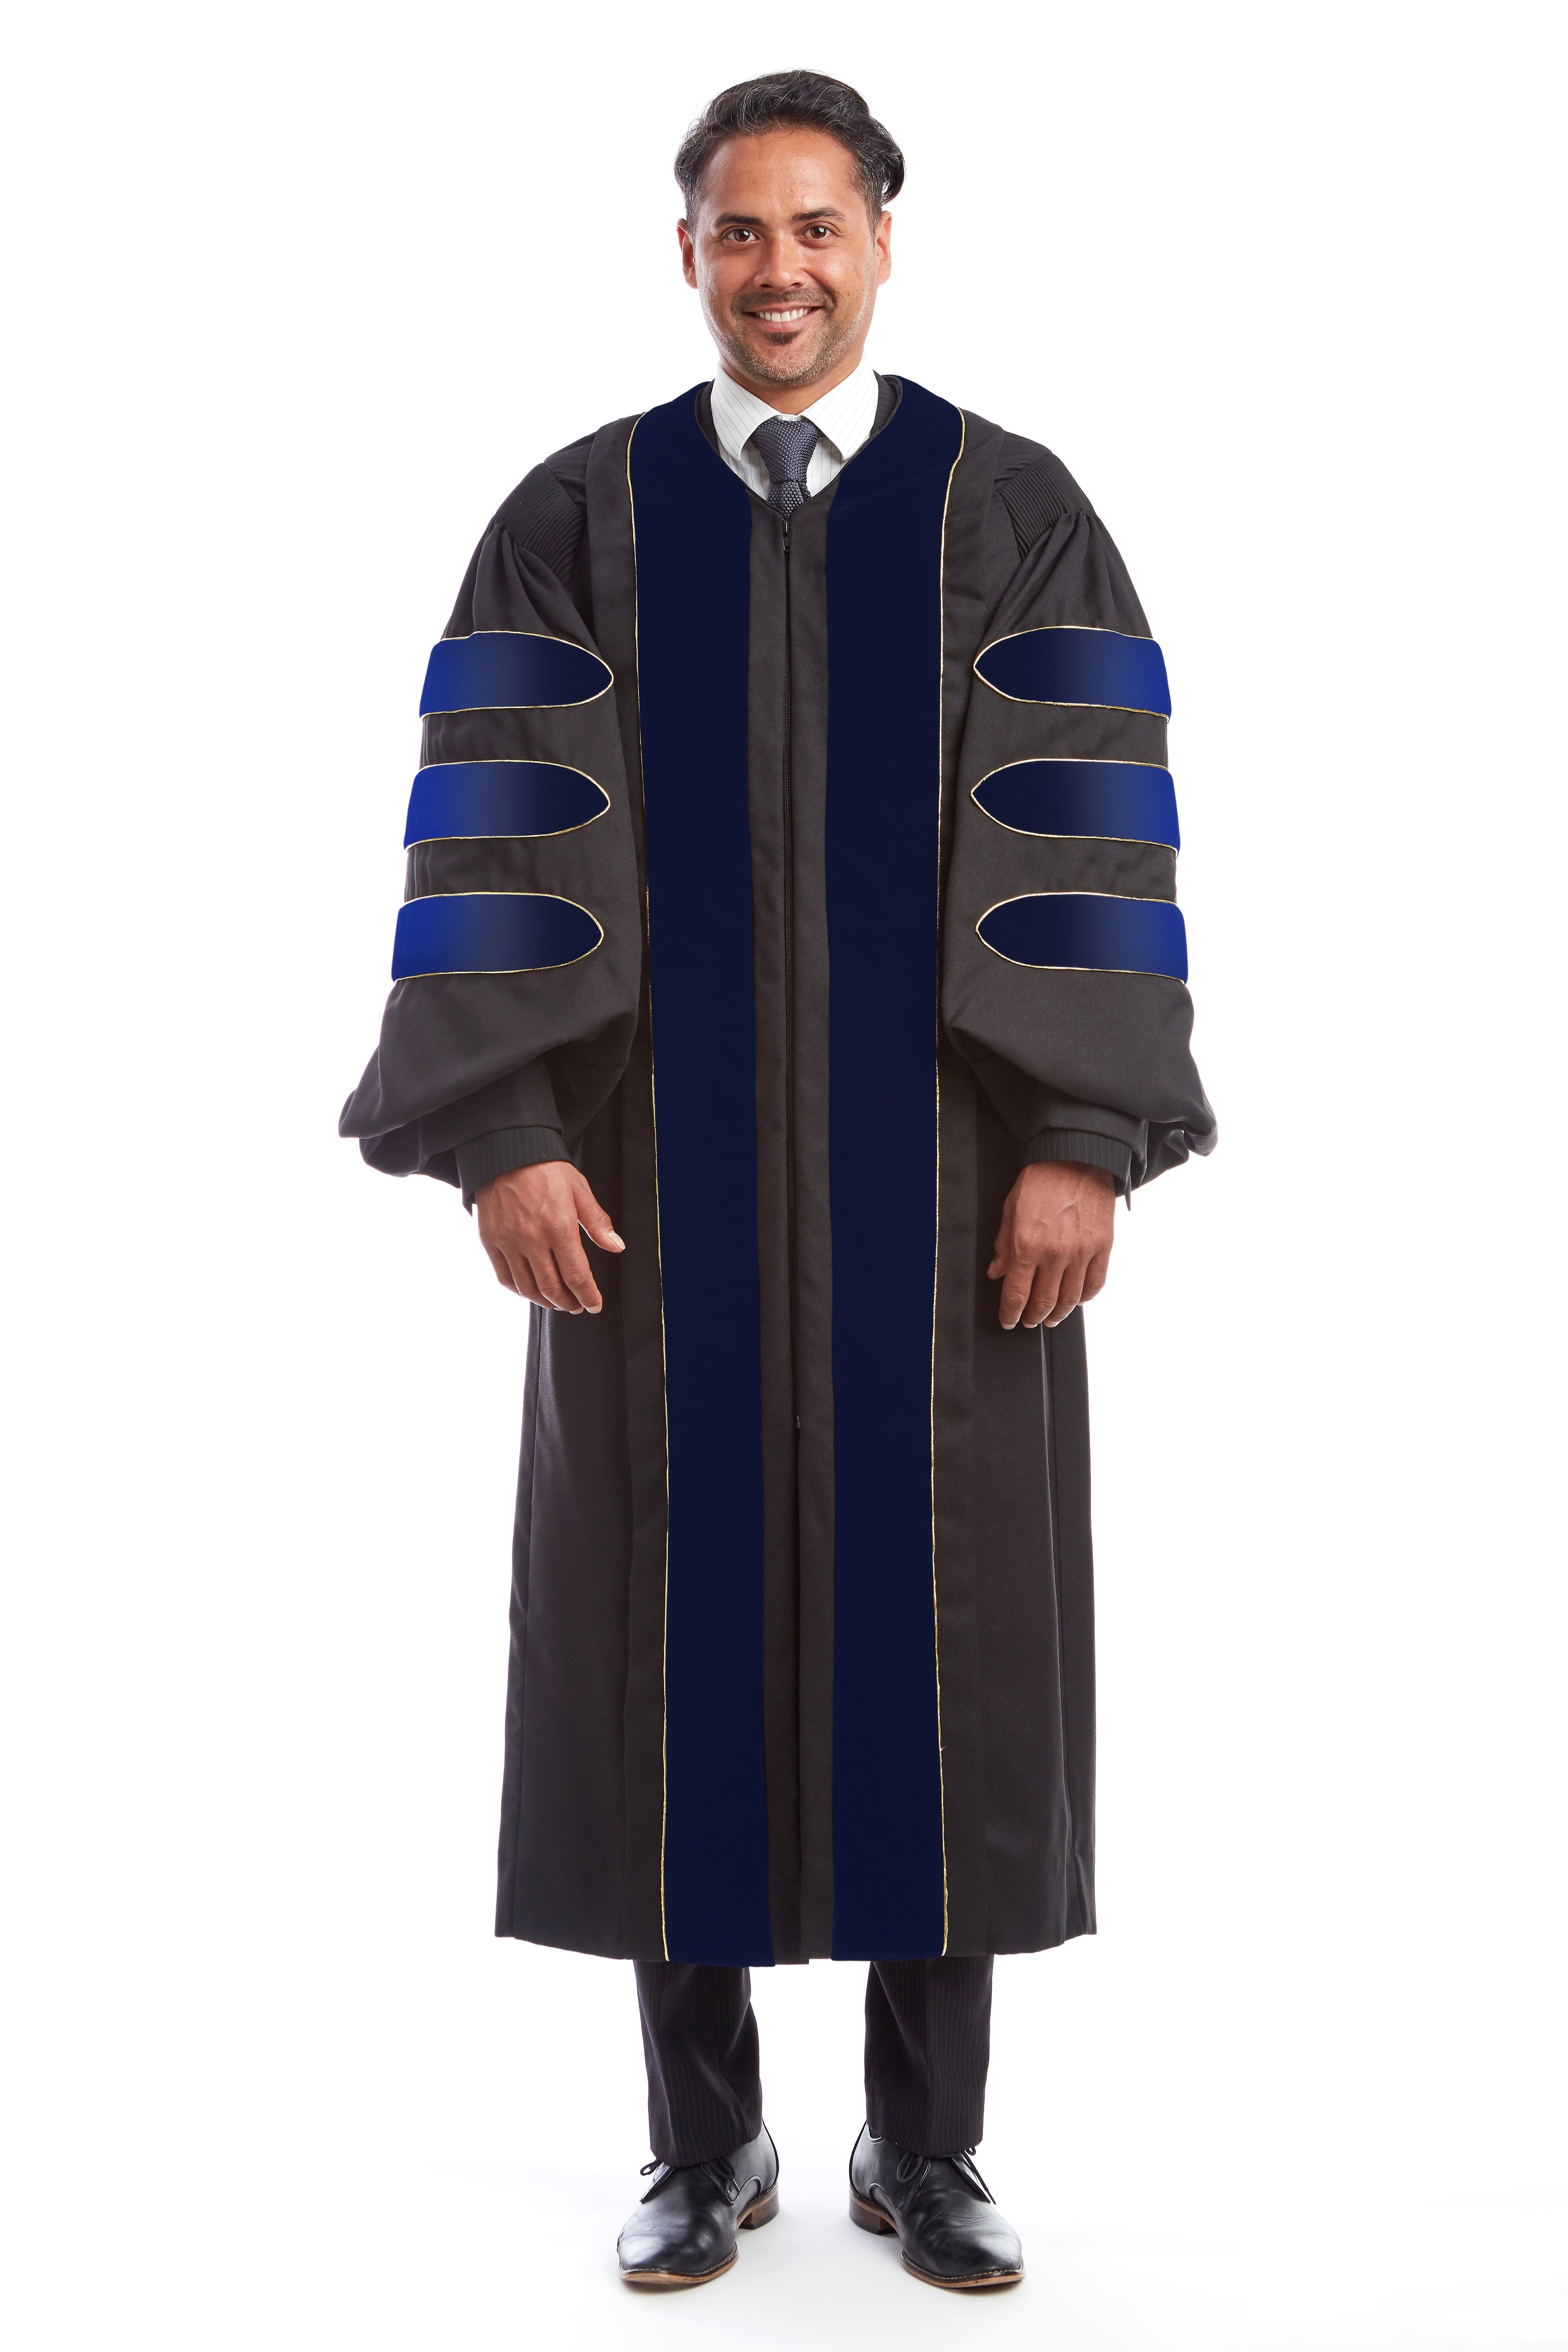 Doctoral Gown for UCSD